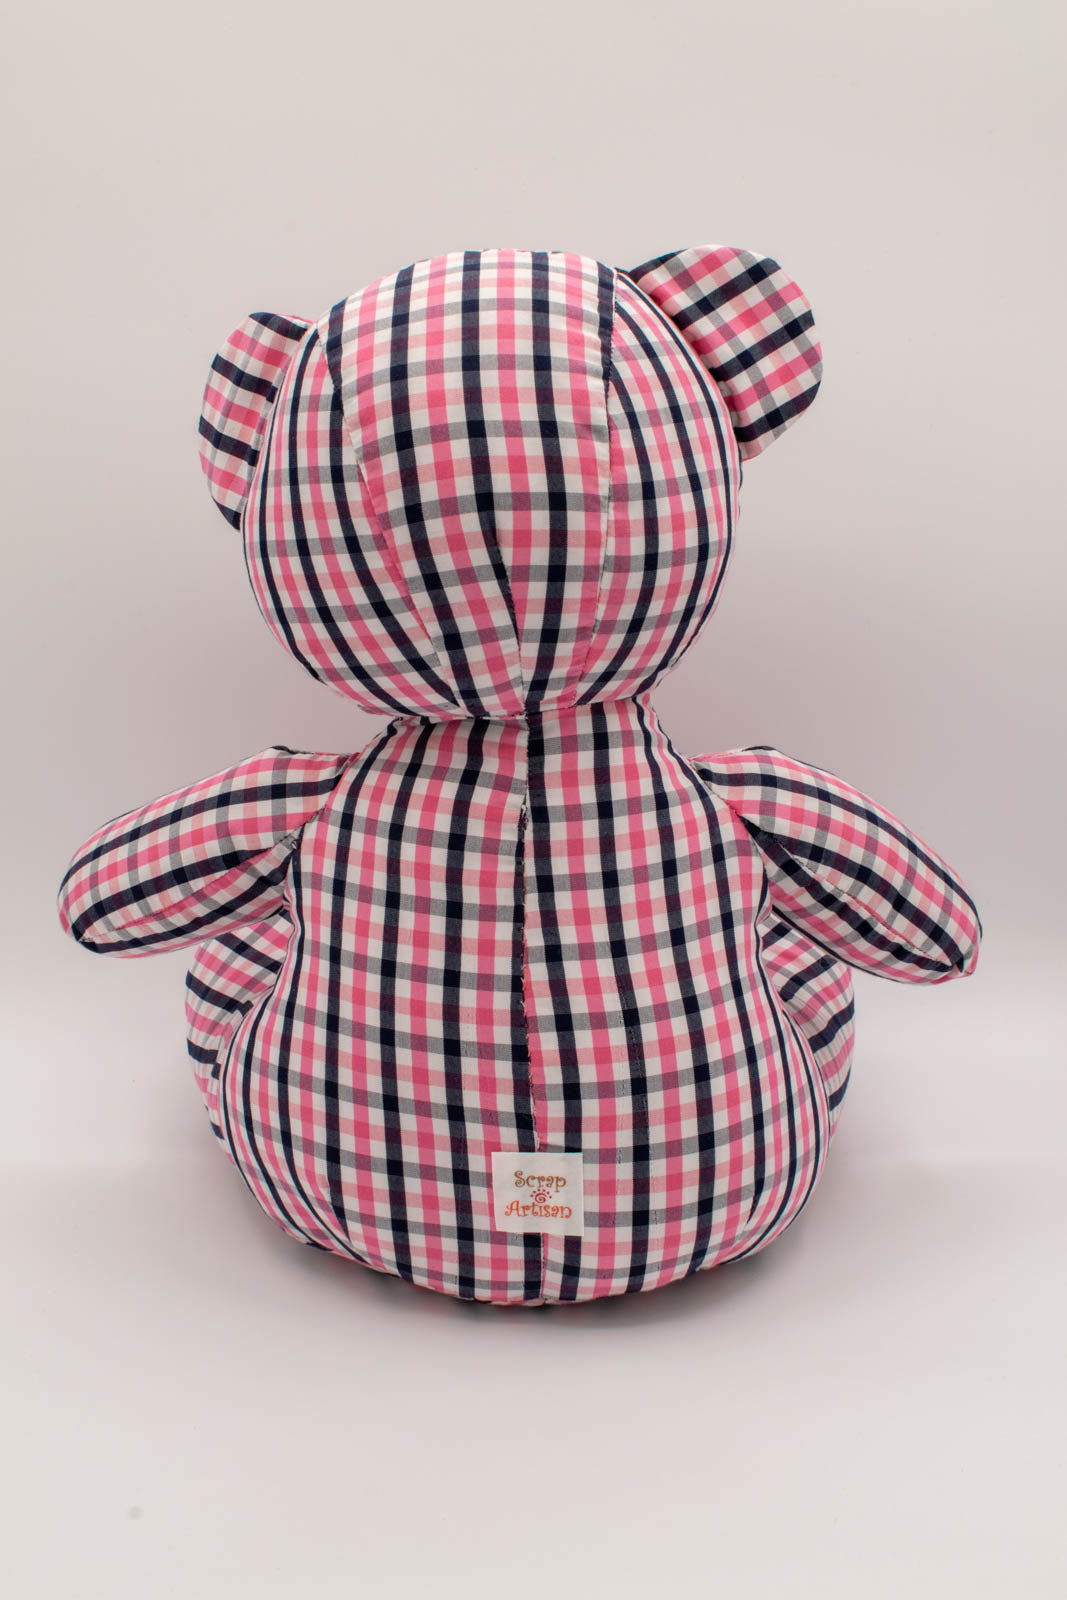 Blue and Pink Gingham Shirt Teddy Bear 5